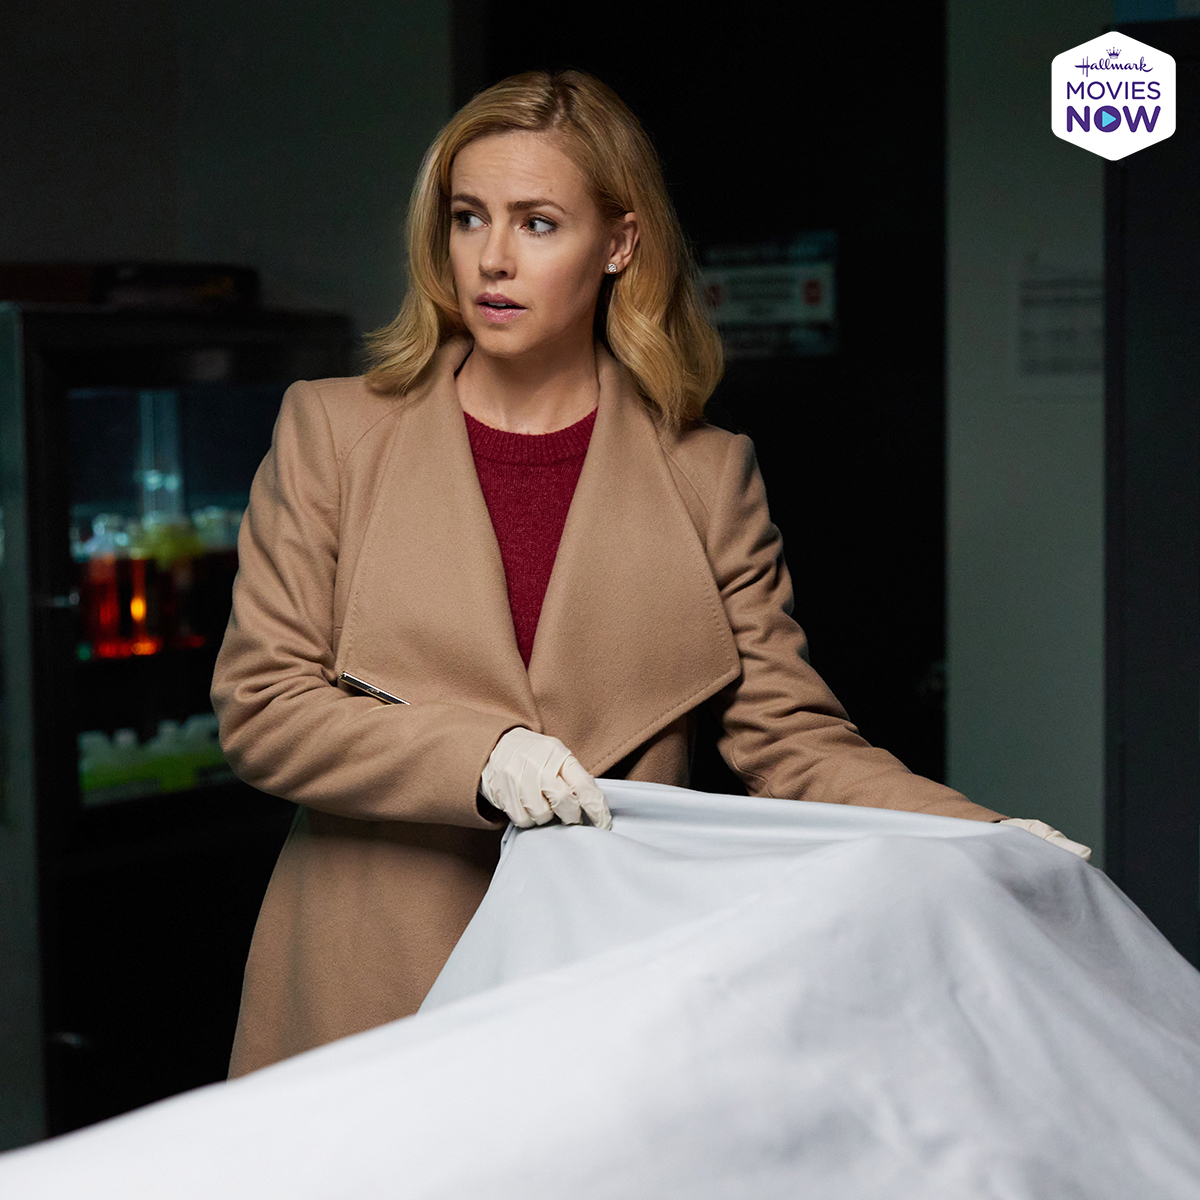 Will Former Army surgeon Rachel @amandaschull find out the truth behind an unexpected murder? #Sleuthers, find out in the All New Hallmark Original, #FamilyPracticeMysteries: Coming Home now on #HallmarkMoviesNow! #Sleuthers